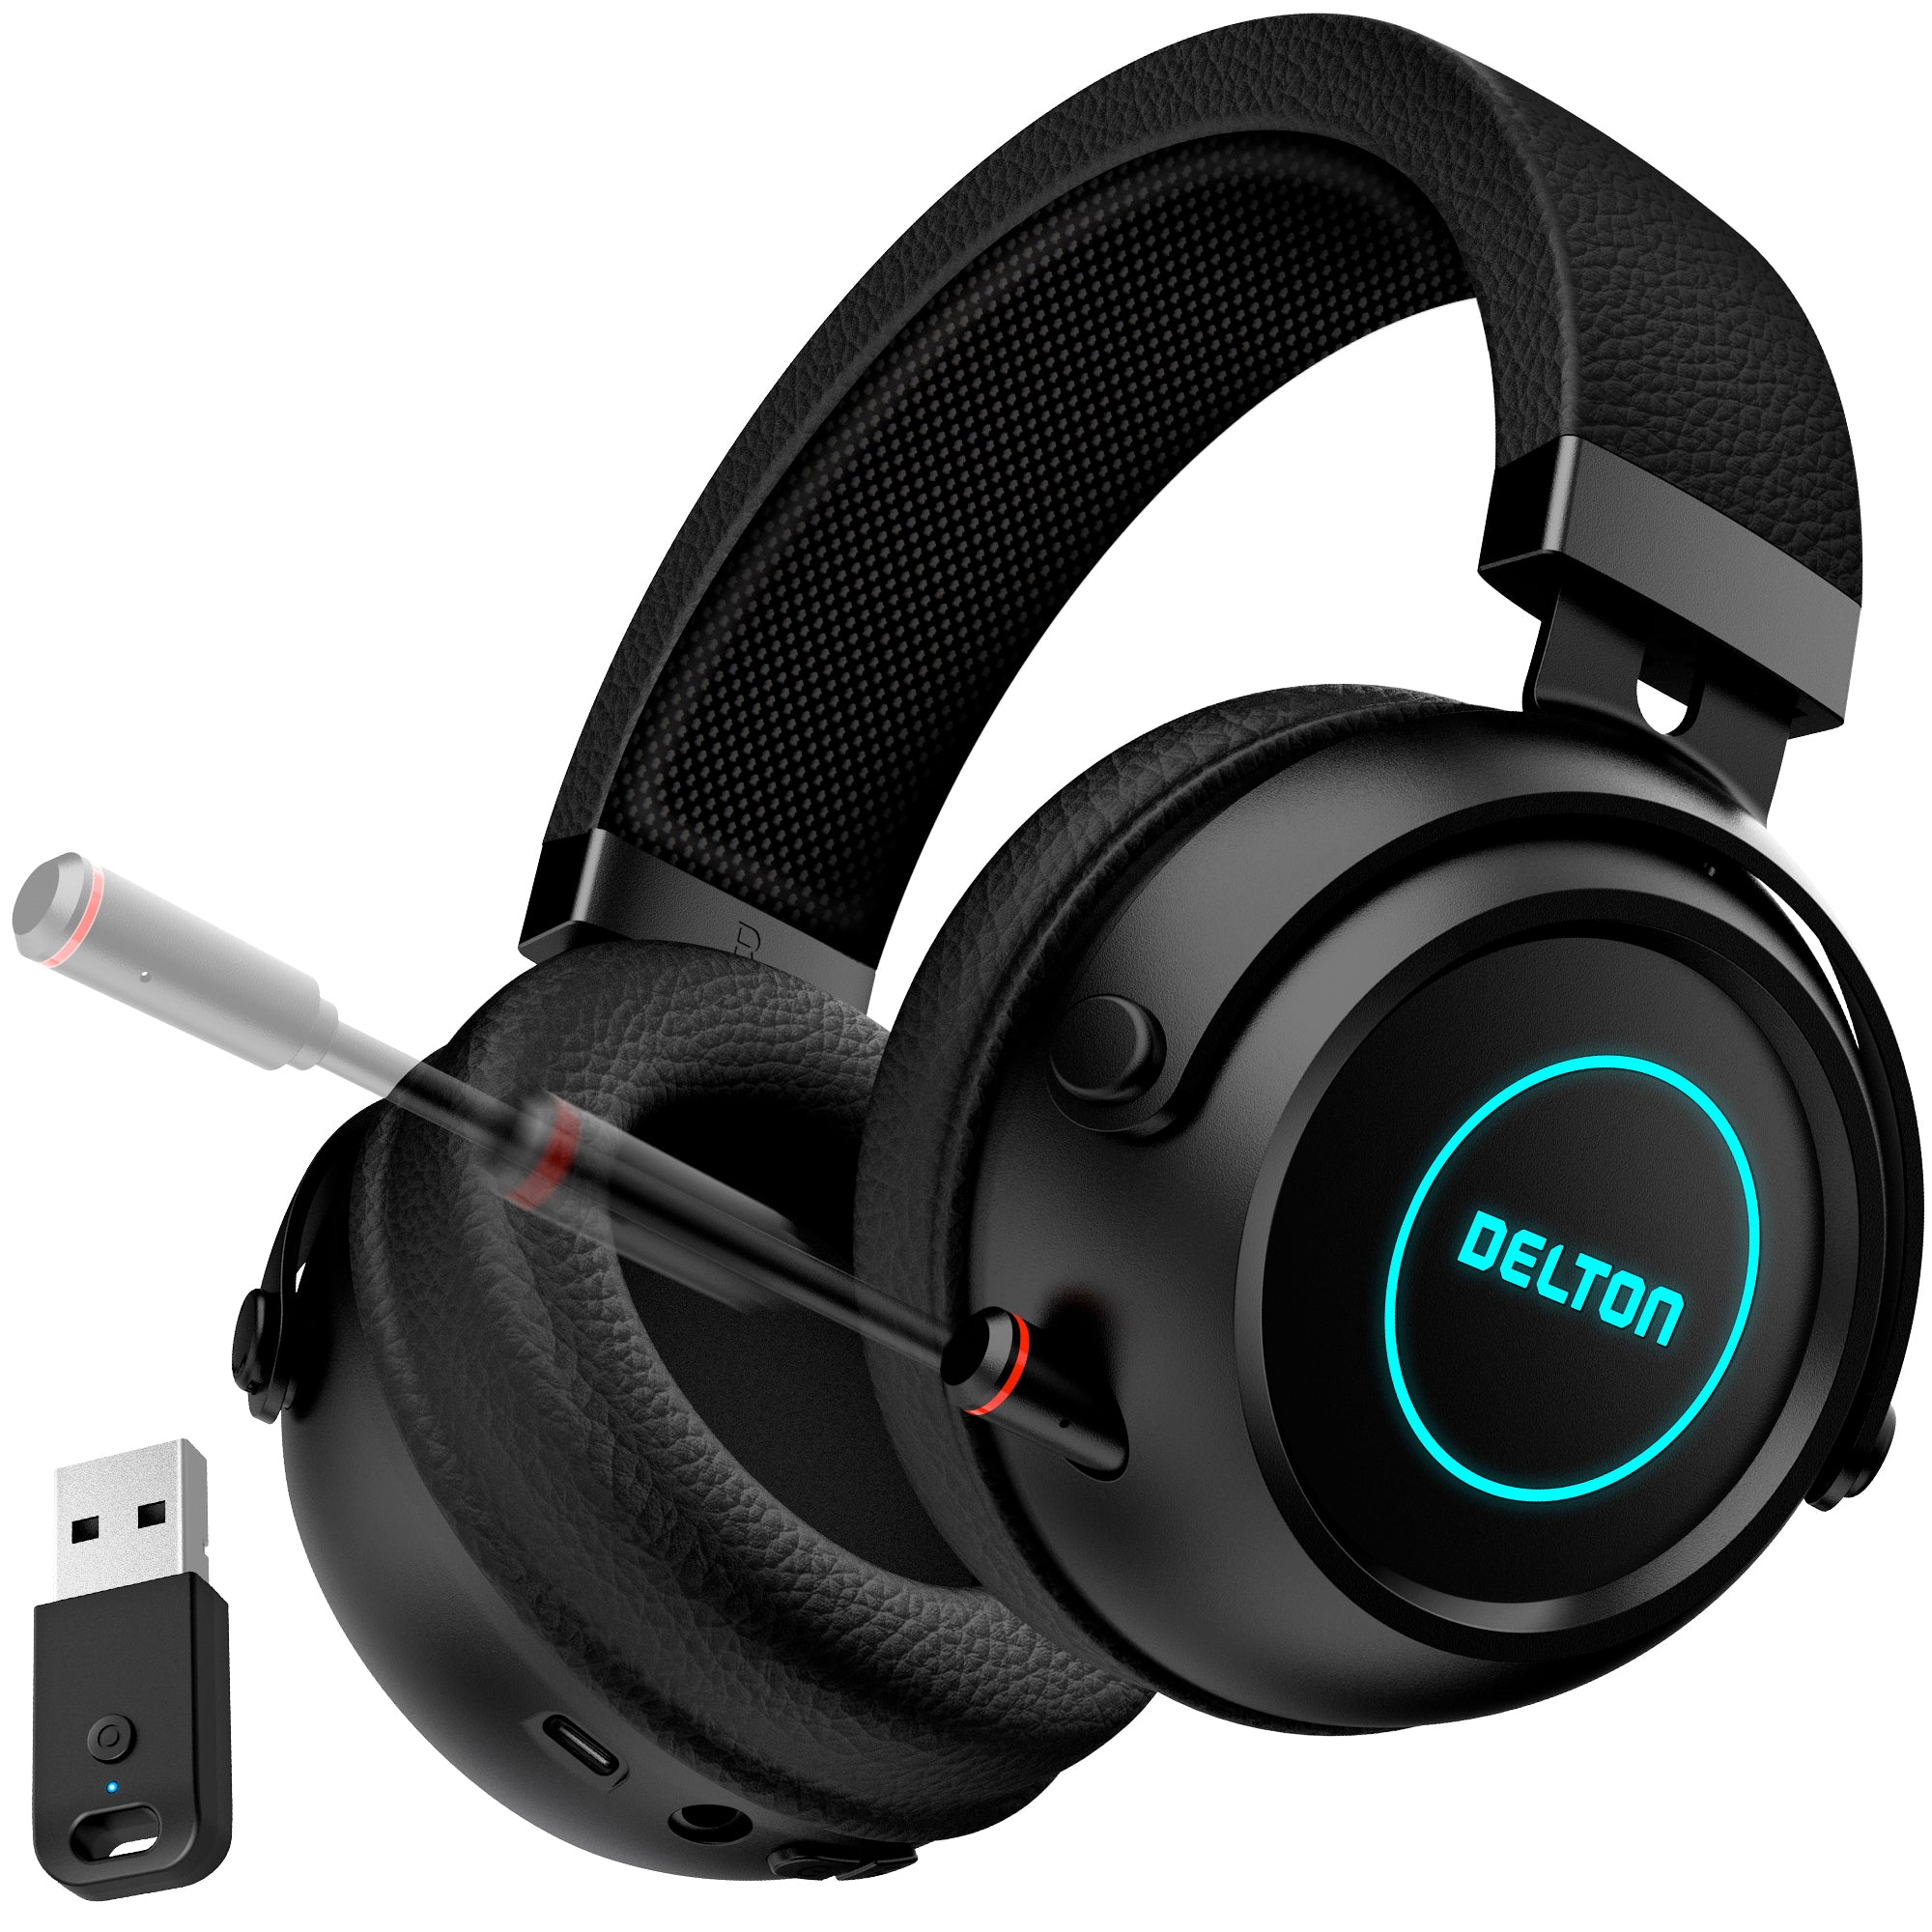 Delton G520 Wireless Noise Canceling Bluetooth Stereo Gaming Headset